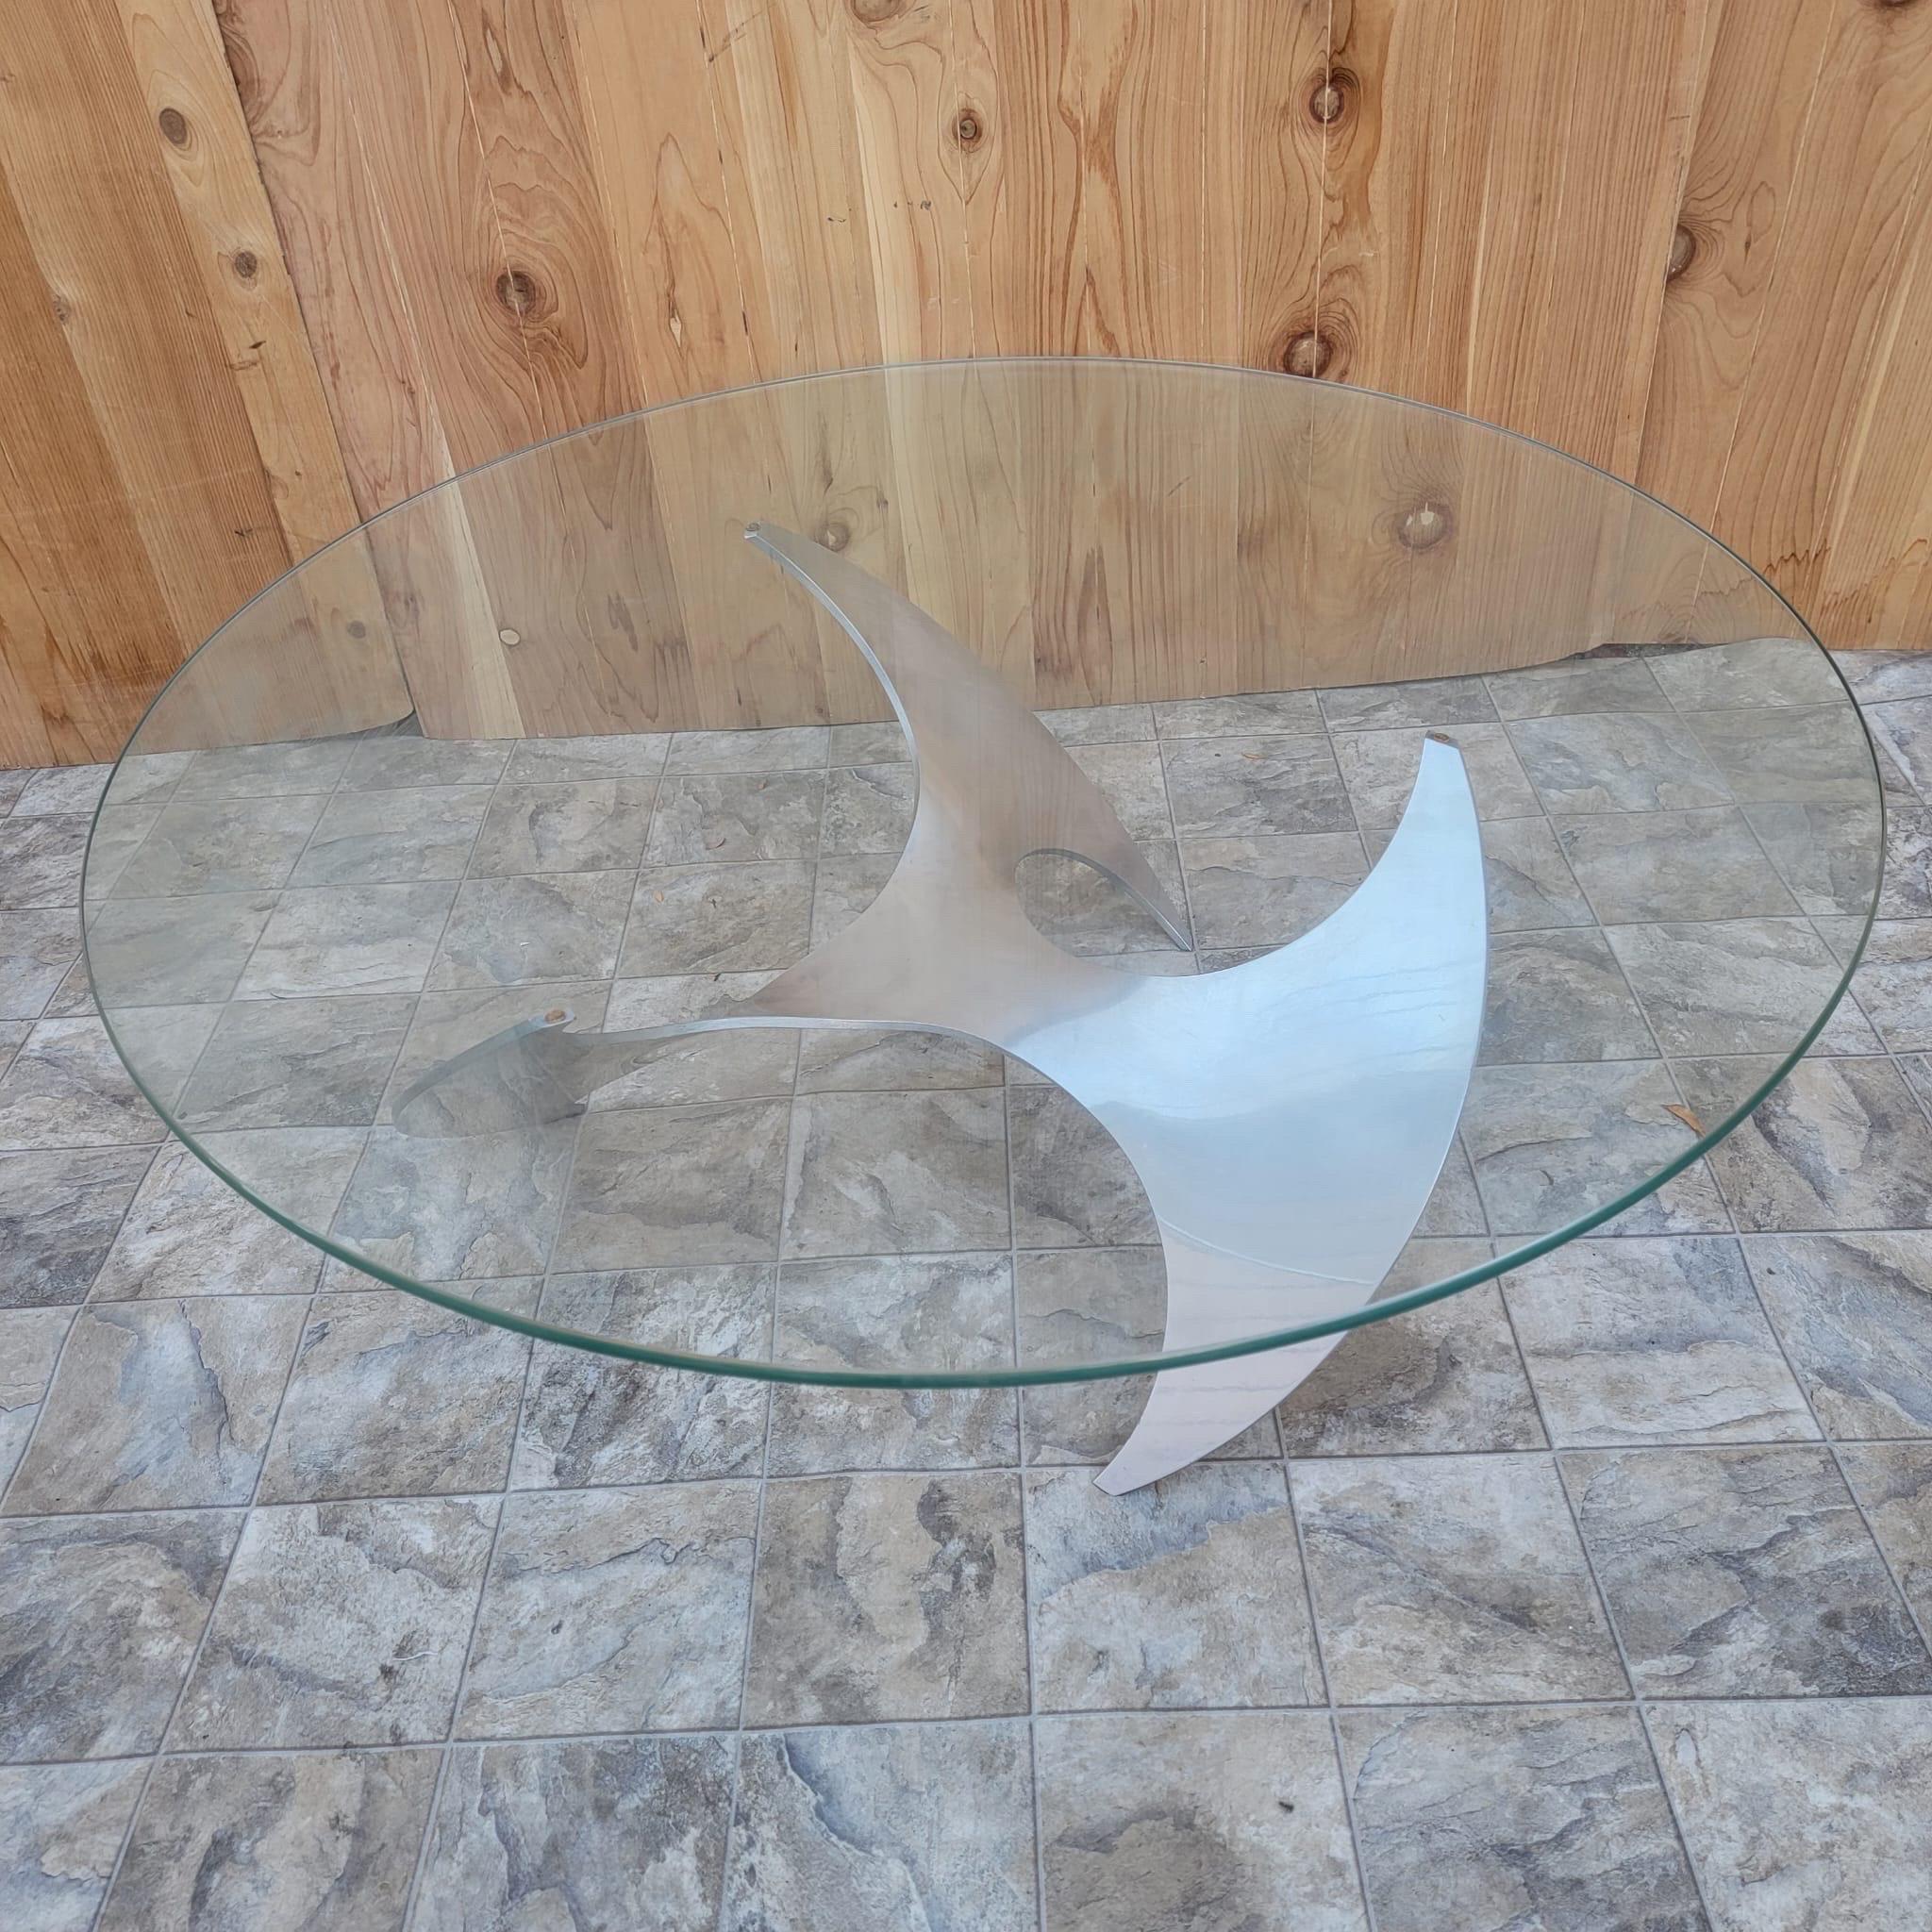 Vintage Industrial Aluminum Propeller coffee table by Knut Hesterberg

Classic mid century modern German propeller coffee table by Knut Hesterberg for Ronald Schmitt featuring a sculptural polished aluminum propeller-form base with a glass top.